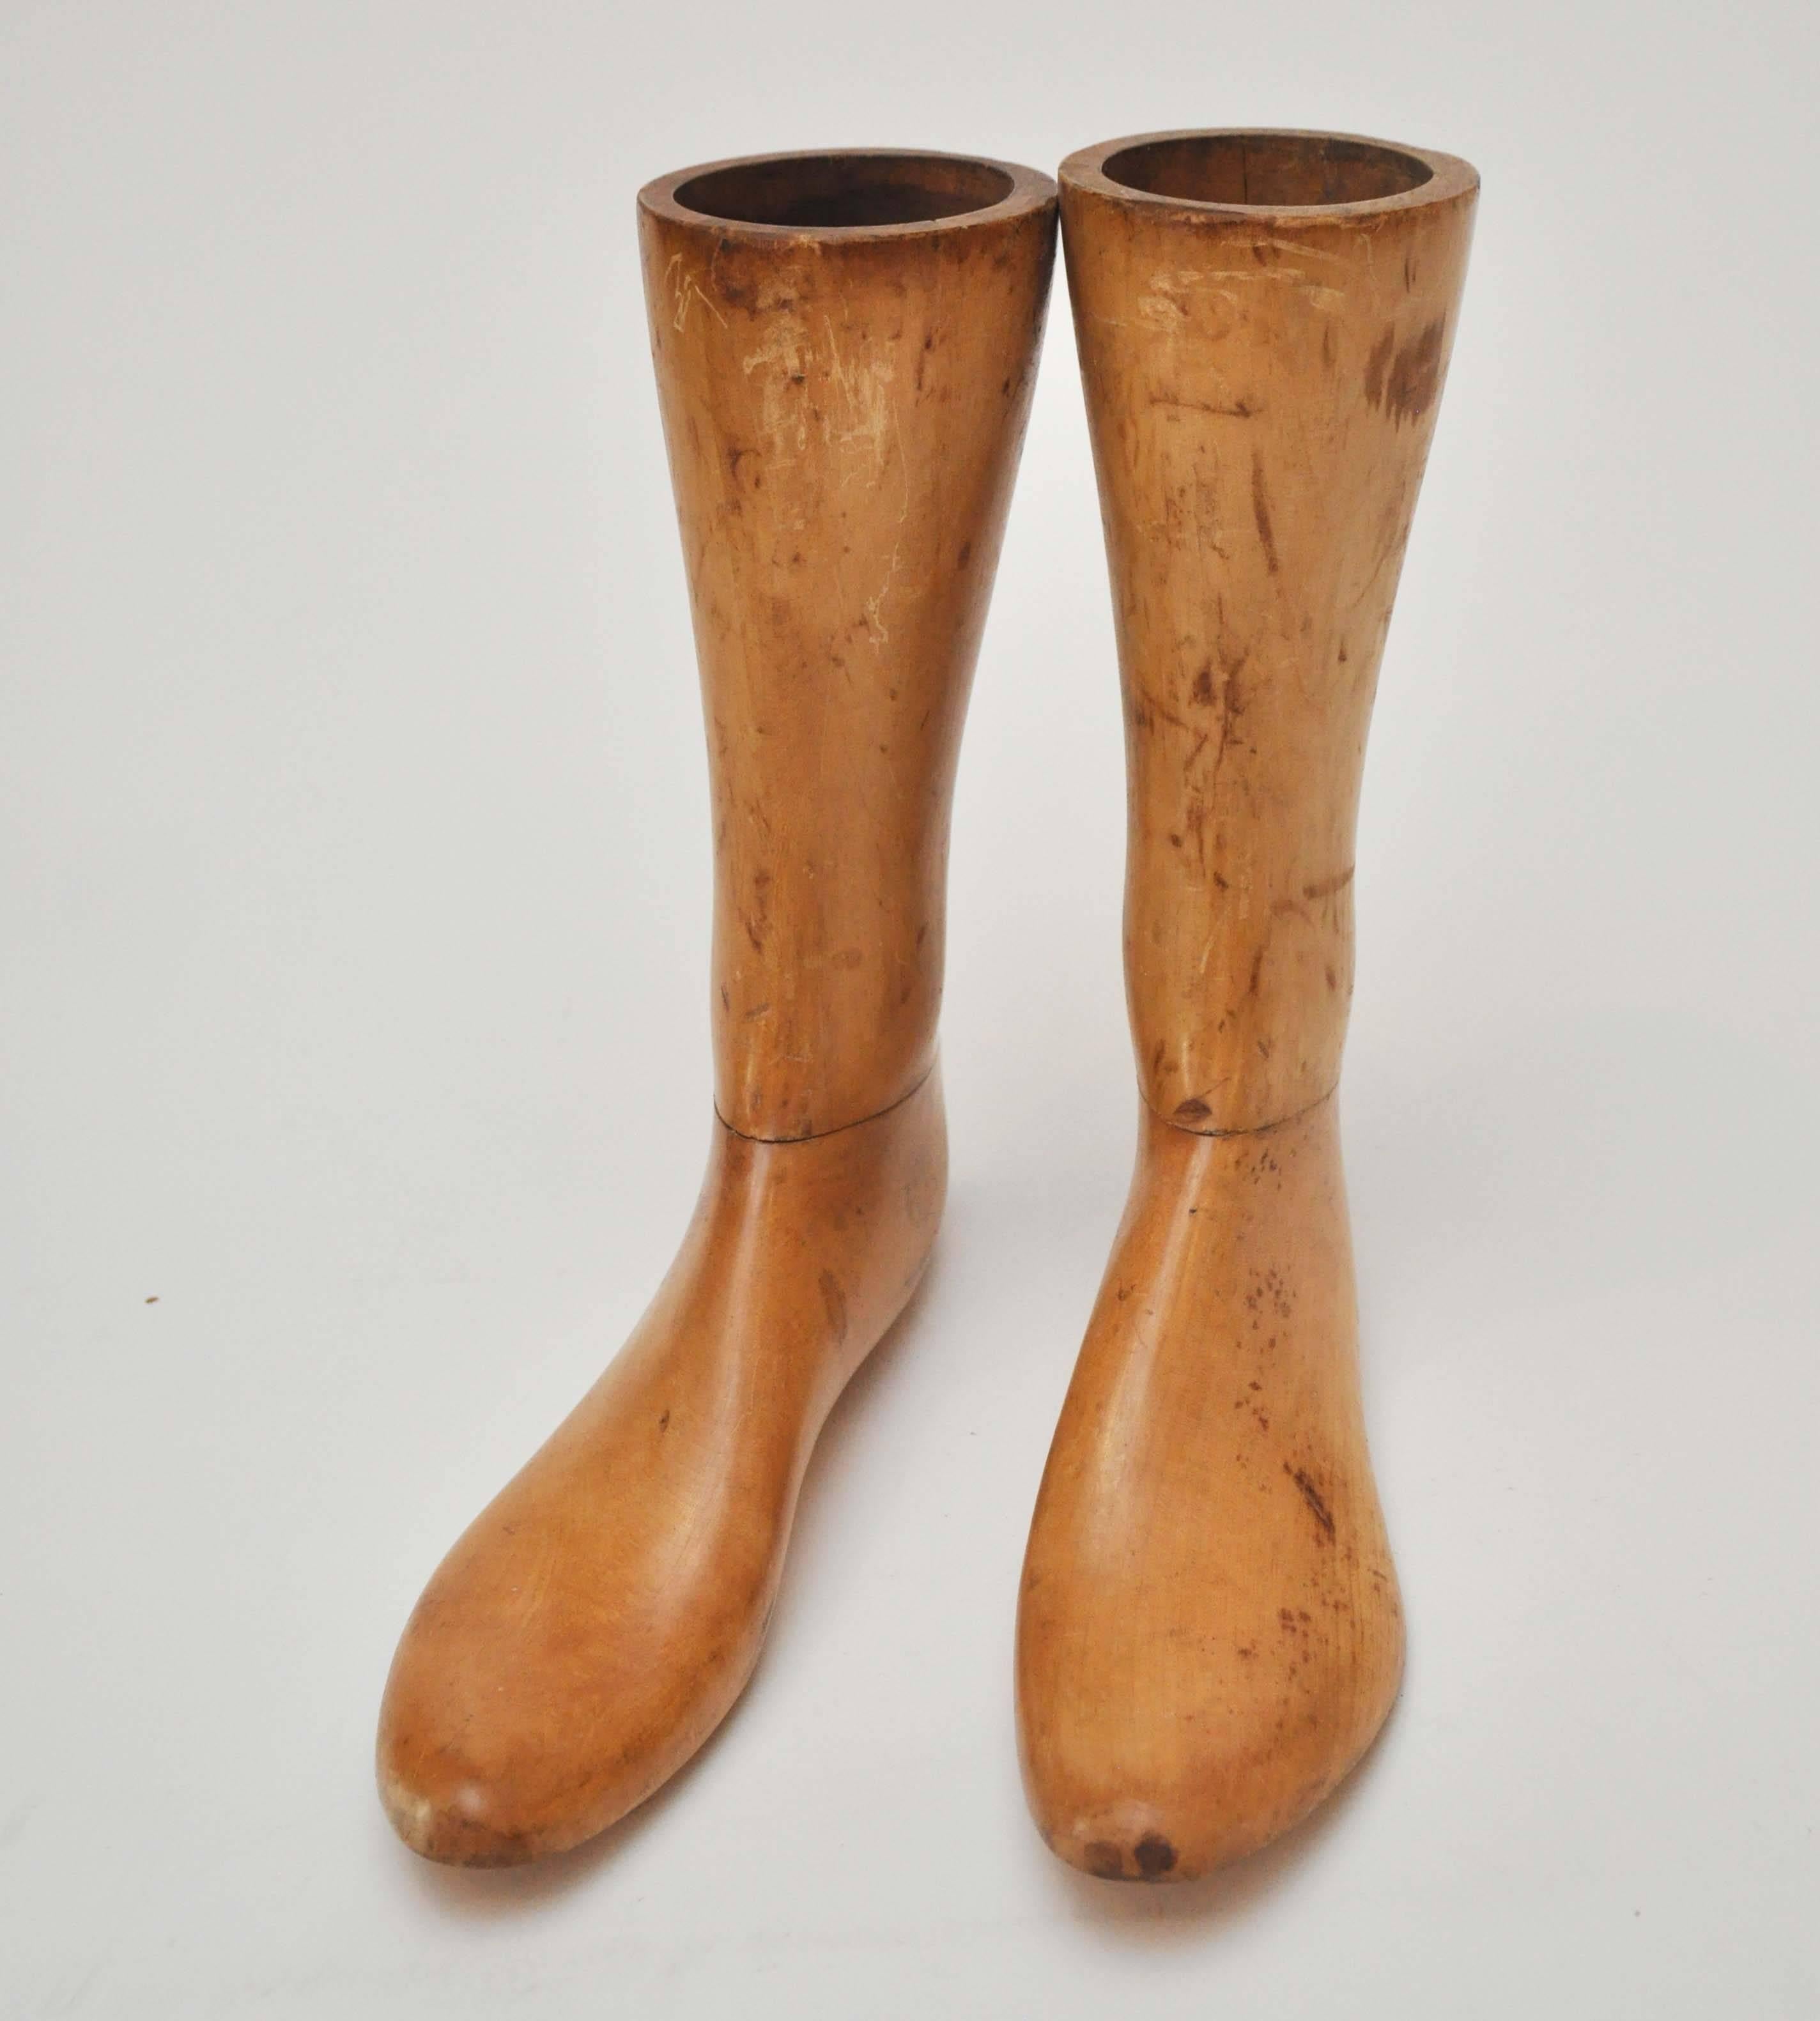 Late 19th century Danish Wooden boot molds. Beautifully constructed of wood in a blonde finish. Found in Denmark.

Dimensions: 3.5"w x 10.75"d x 10.5"h